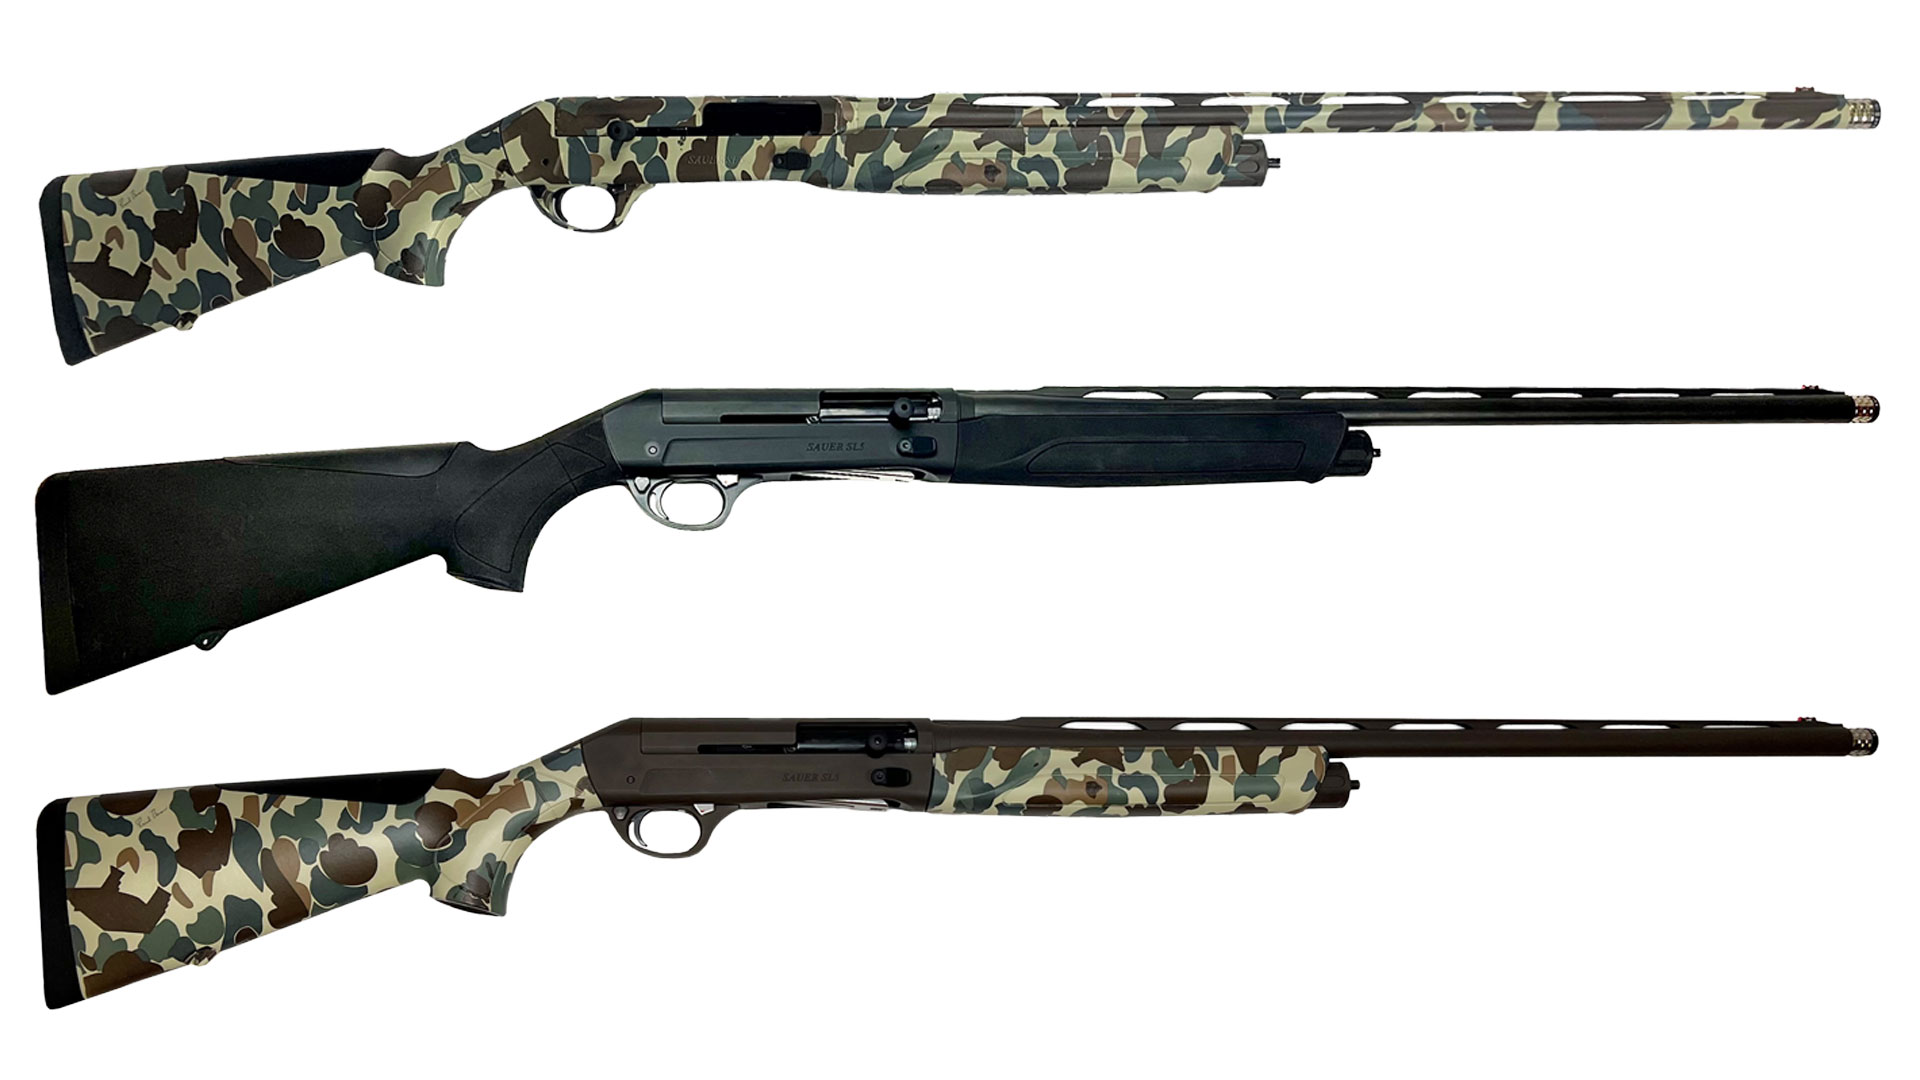 Sauer Introduces SL5 Waterfowl Shotguns An Official Journal Of The NRA